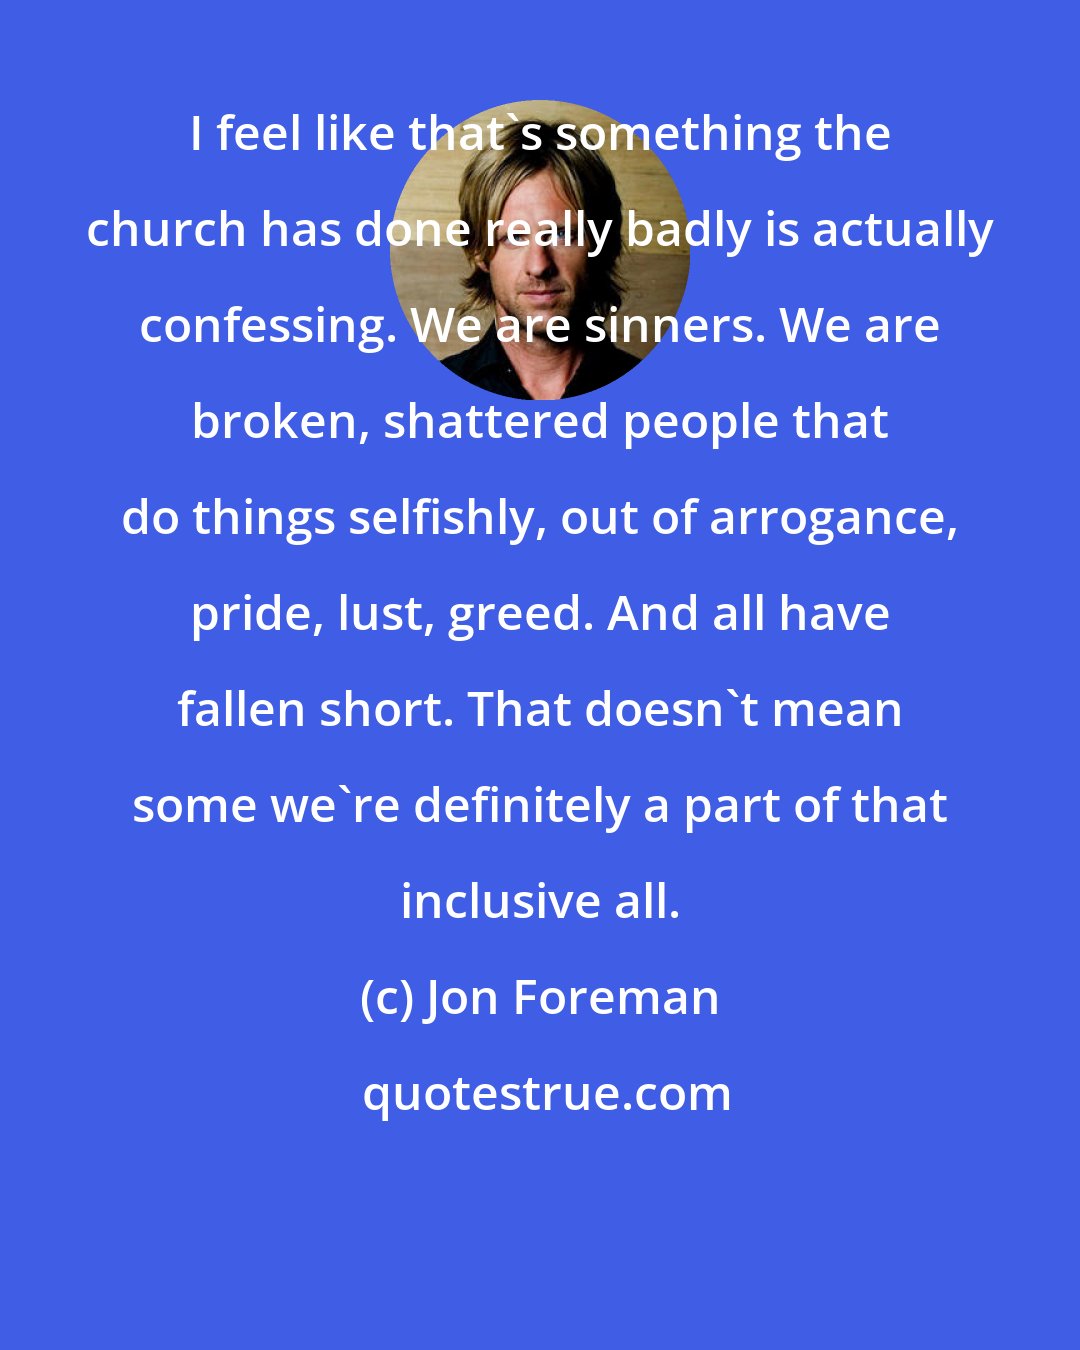 Jon Foreman: I feel like that's something the church has done really badly is actually confessing. We are sinners. We are broken, shattered people that do things selfishly, out of arrogance, pride, lust, greed. And all have fallen short. That doesn't mean some we're definitely a part of that inclusive all.